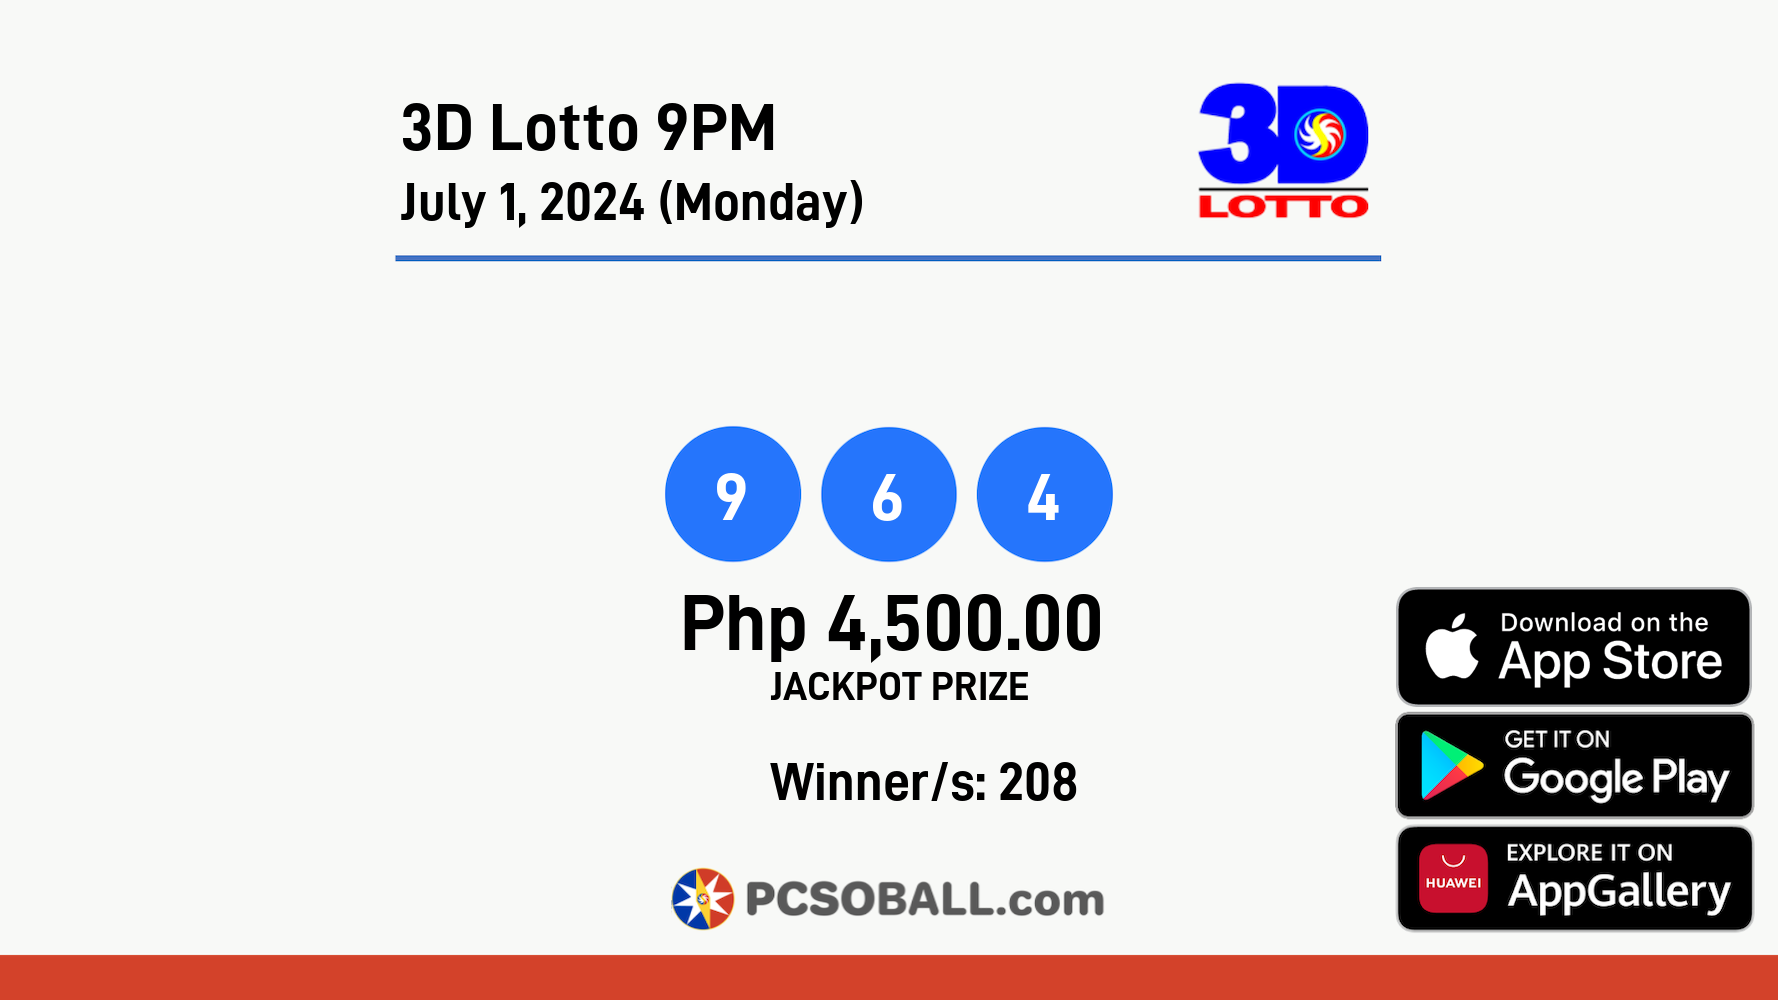 3D Lotto 9PM July 1, 2024 (Monday) Result